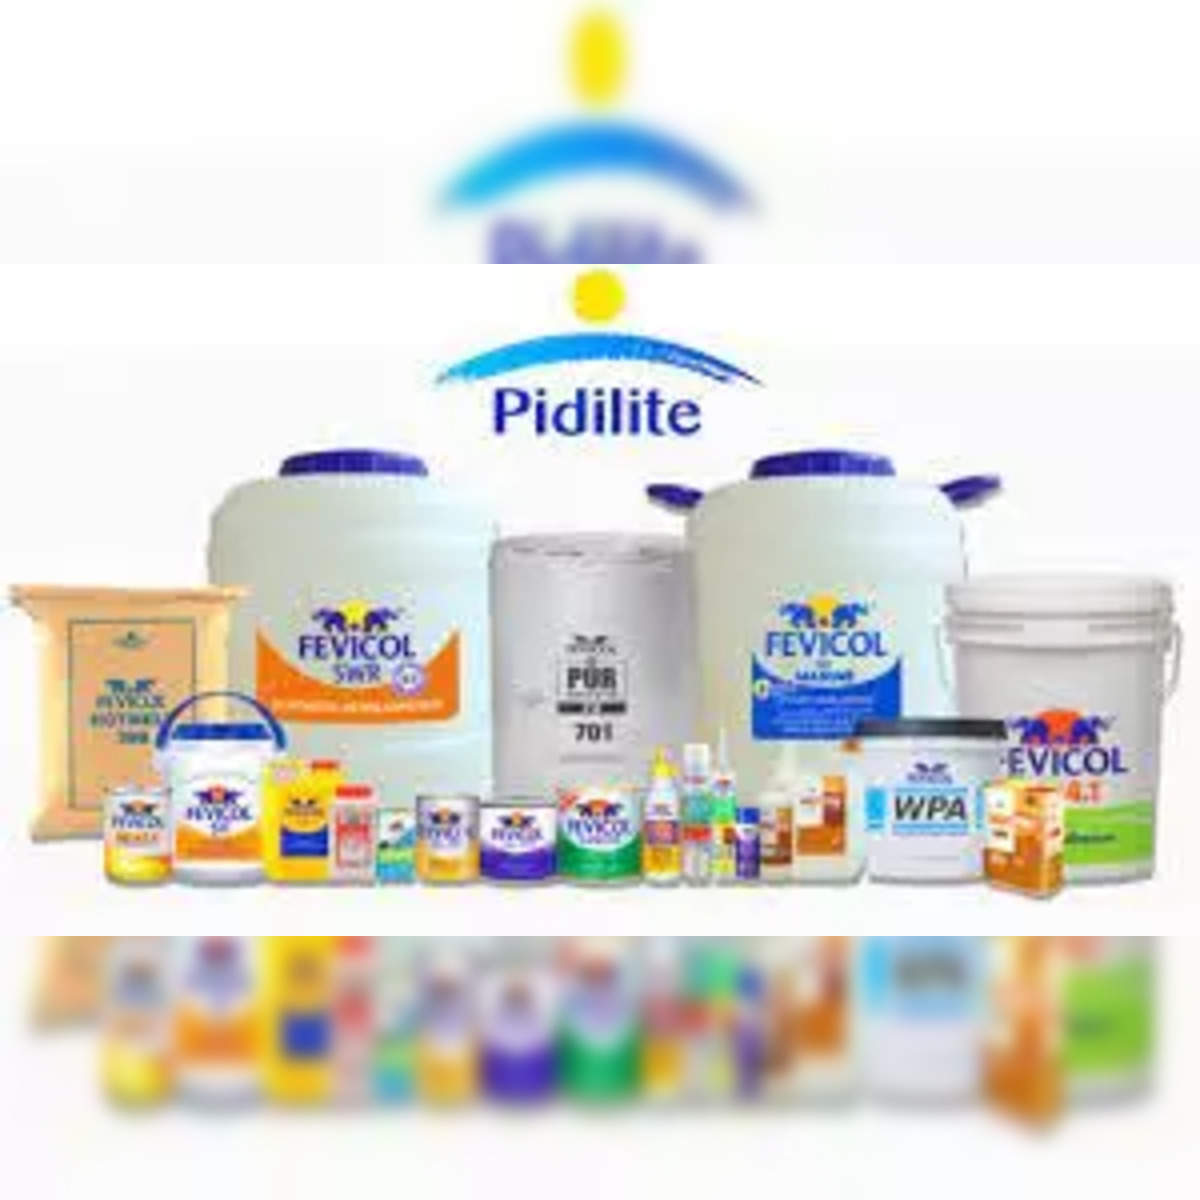 Buy Pidilite WD-40 Multiple Maintenance Spray Online At Best Prices